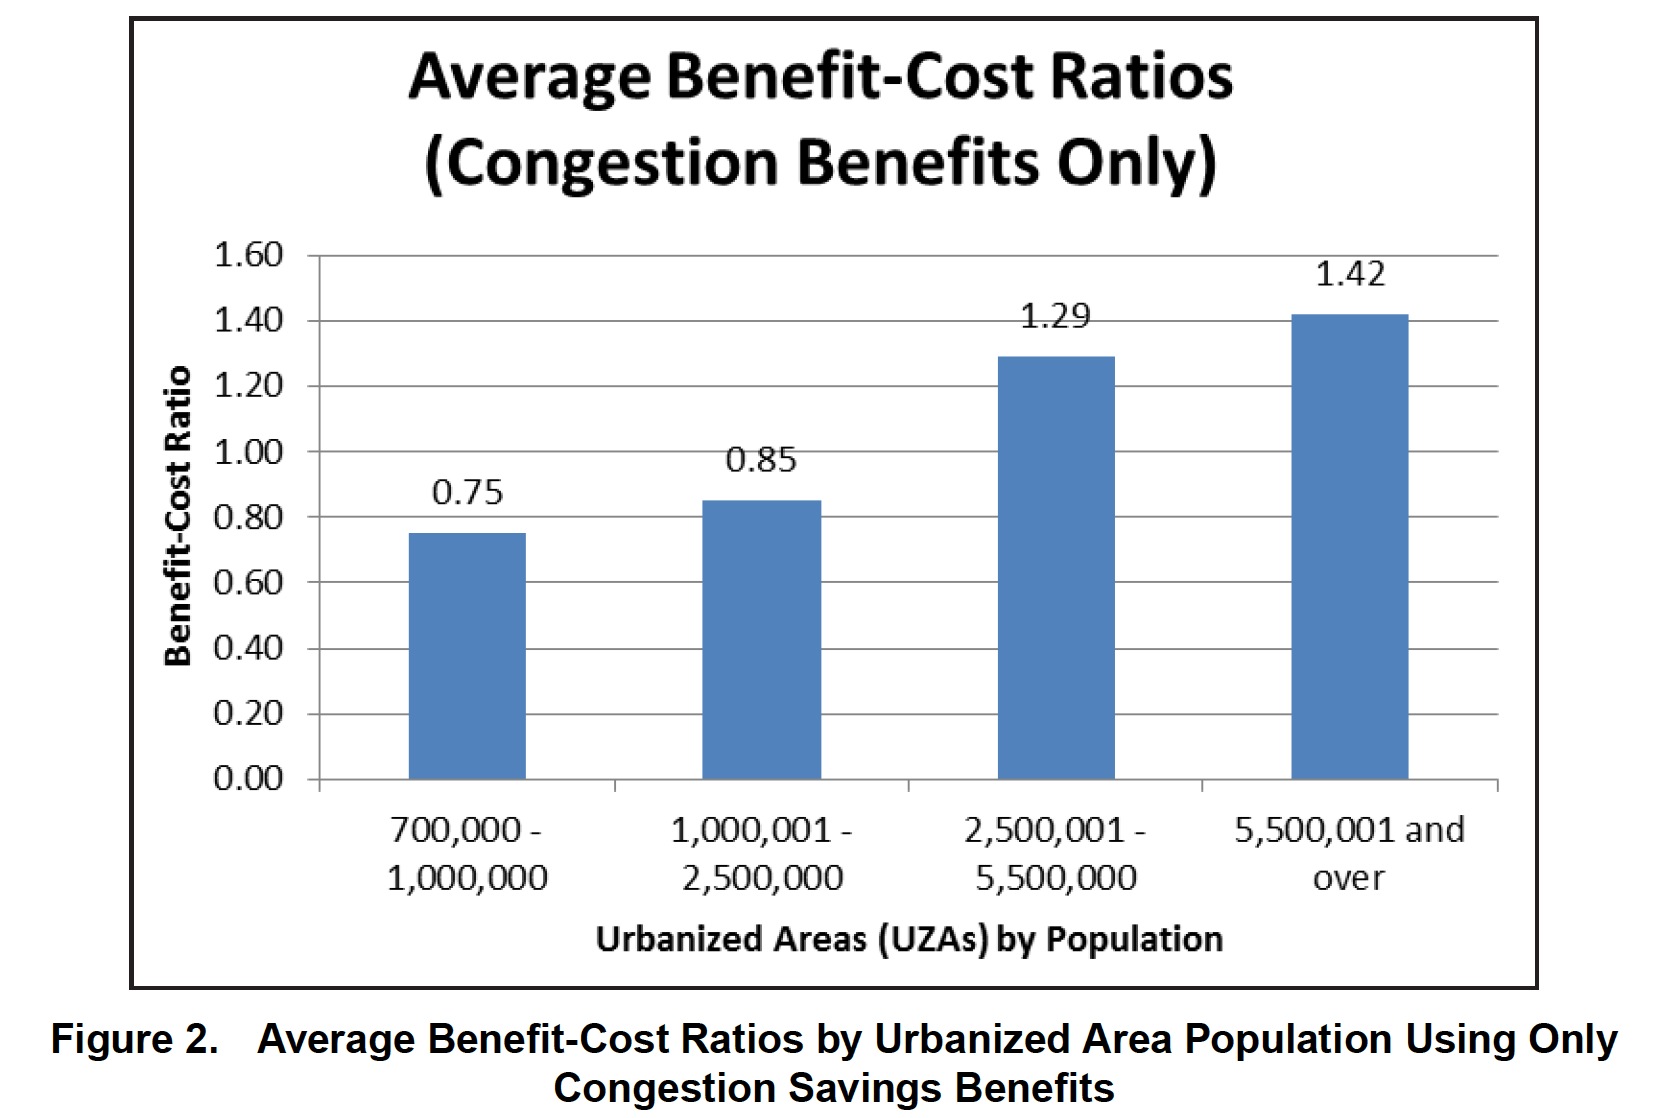 Figure 2. Average Benefit-Cost Ratios by Urbanized Area Population Using Only Congestion Savings Benefits